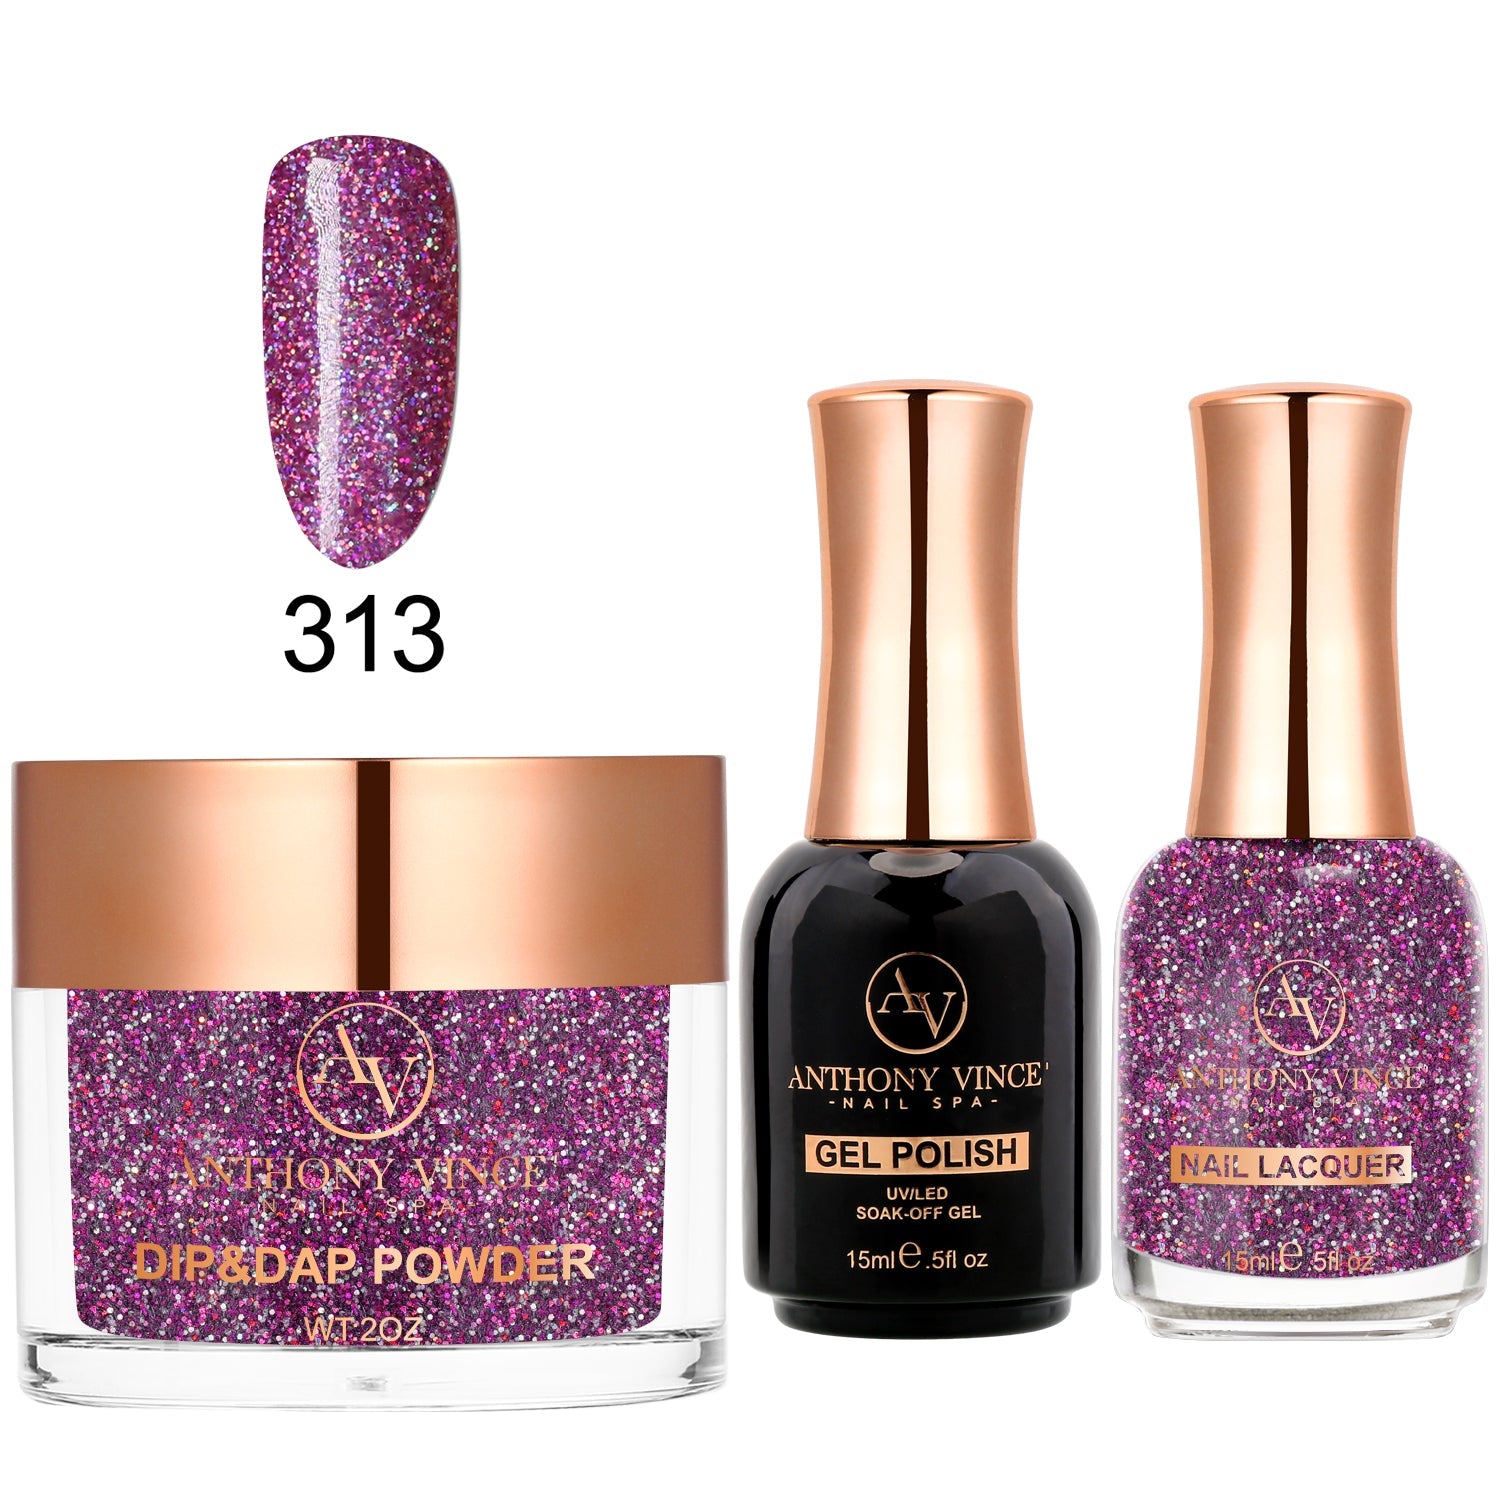 GLITTERY DAYS COLLECTION